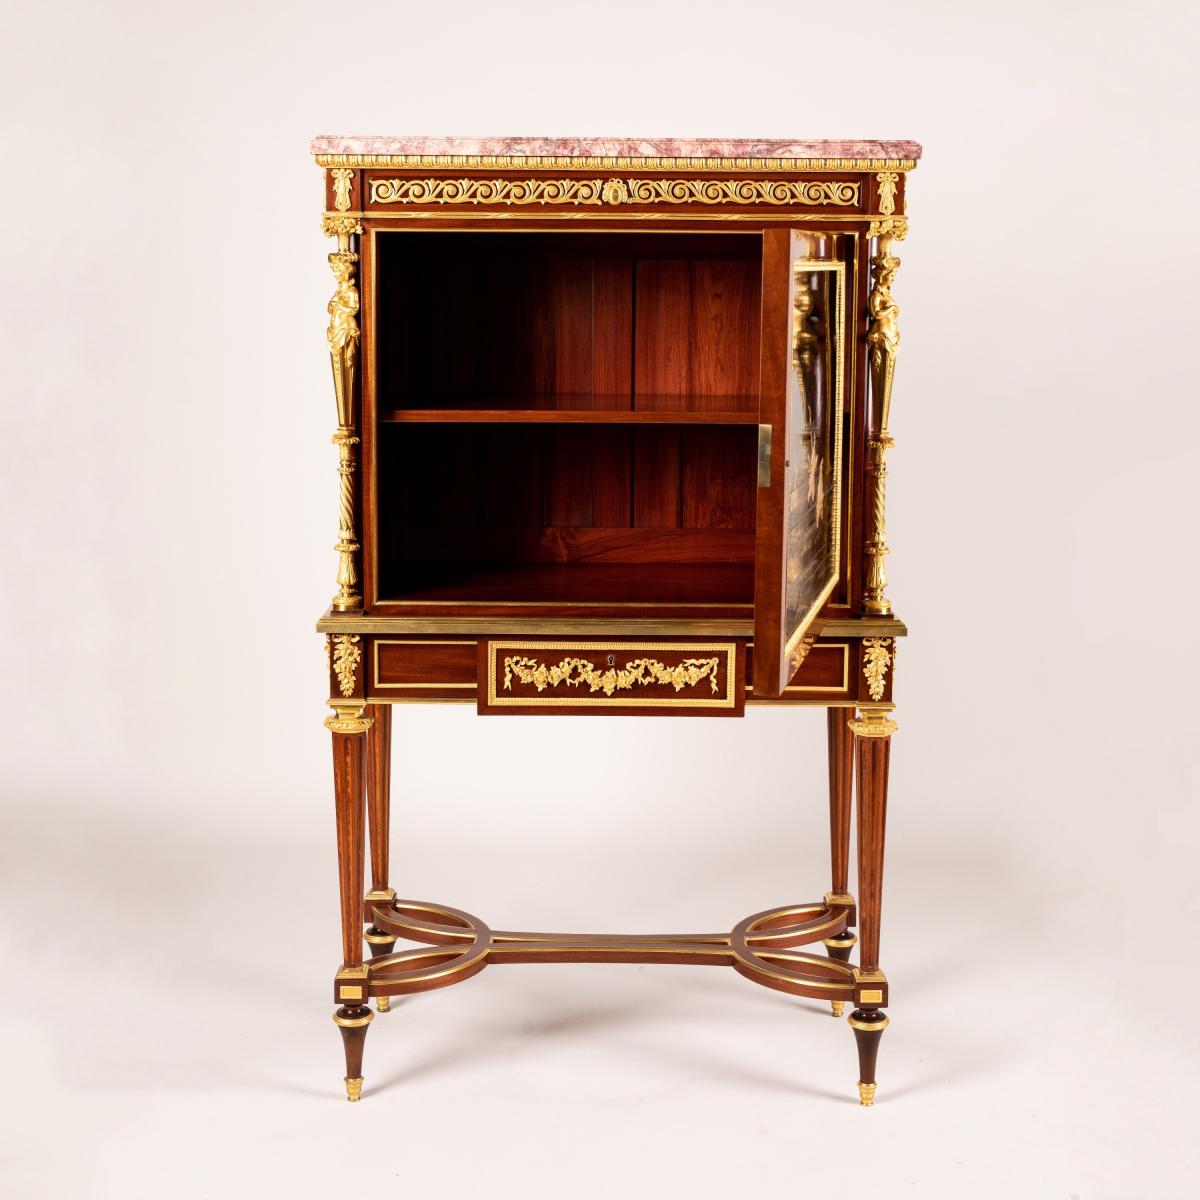 An Exquisite Pair of Louis XVI Style Cabinets By Charles-Guillaume Winckelsen